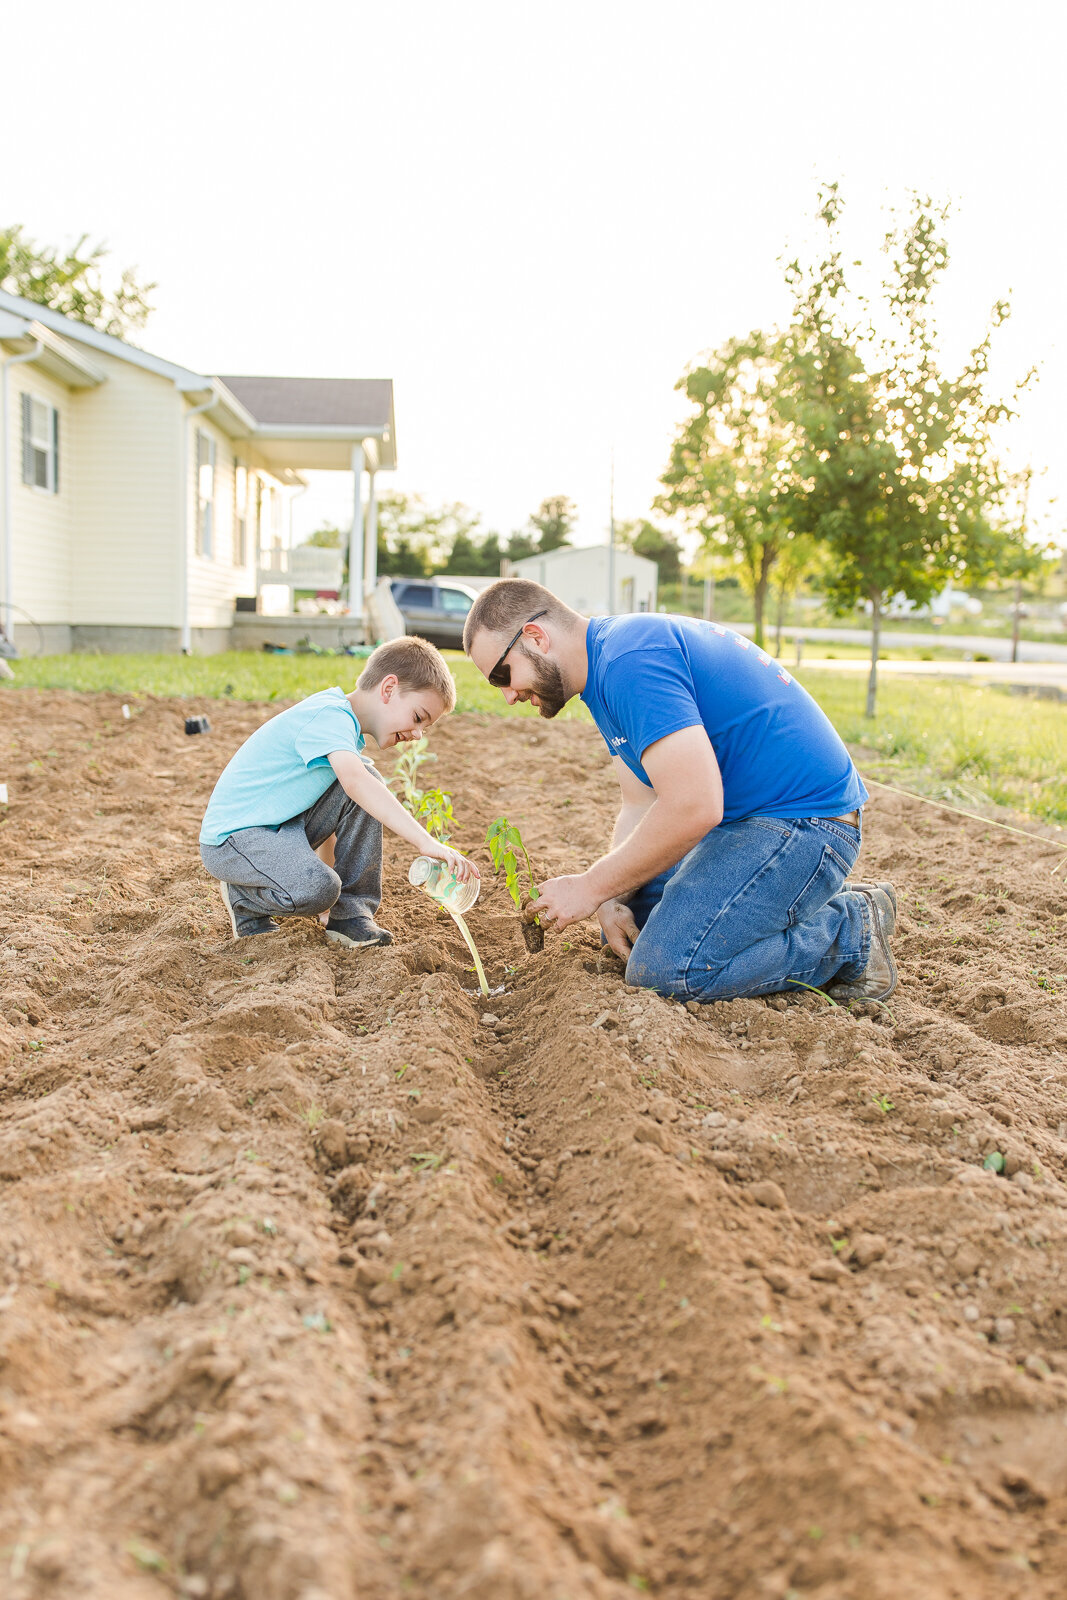 my husband and son planting garden together